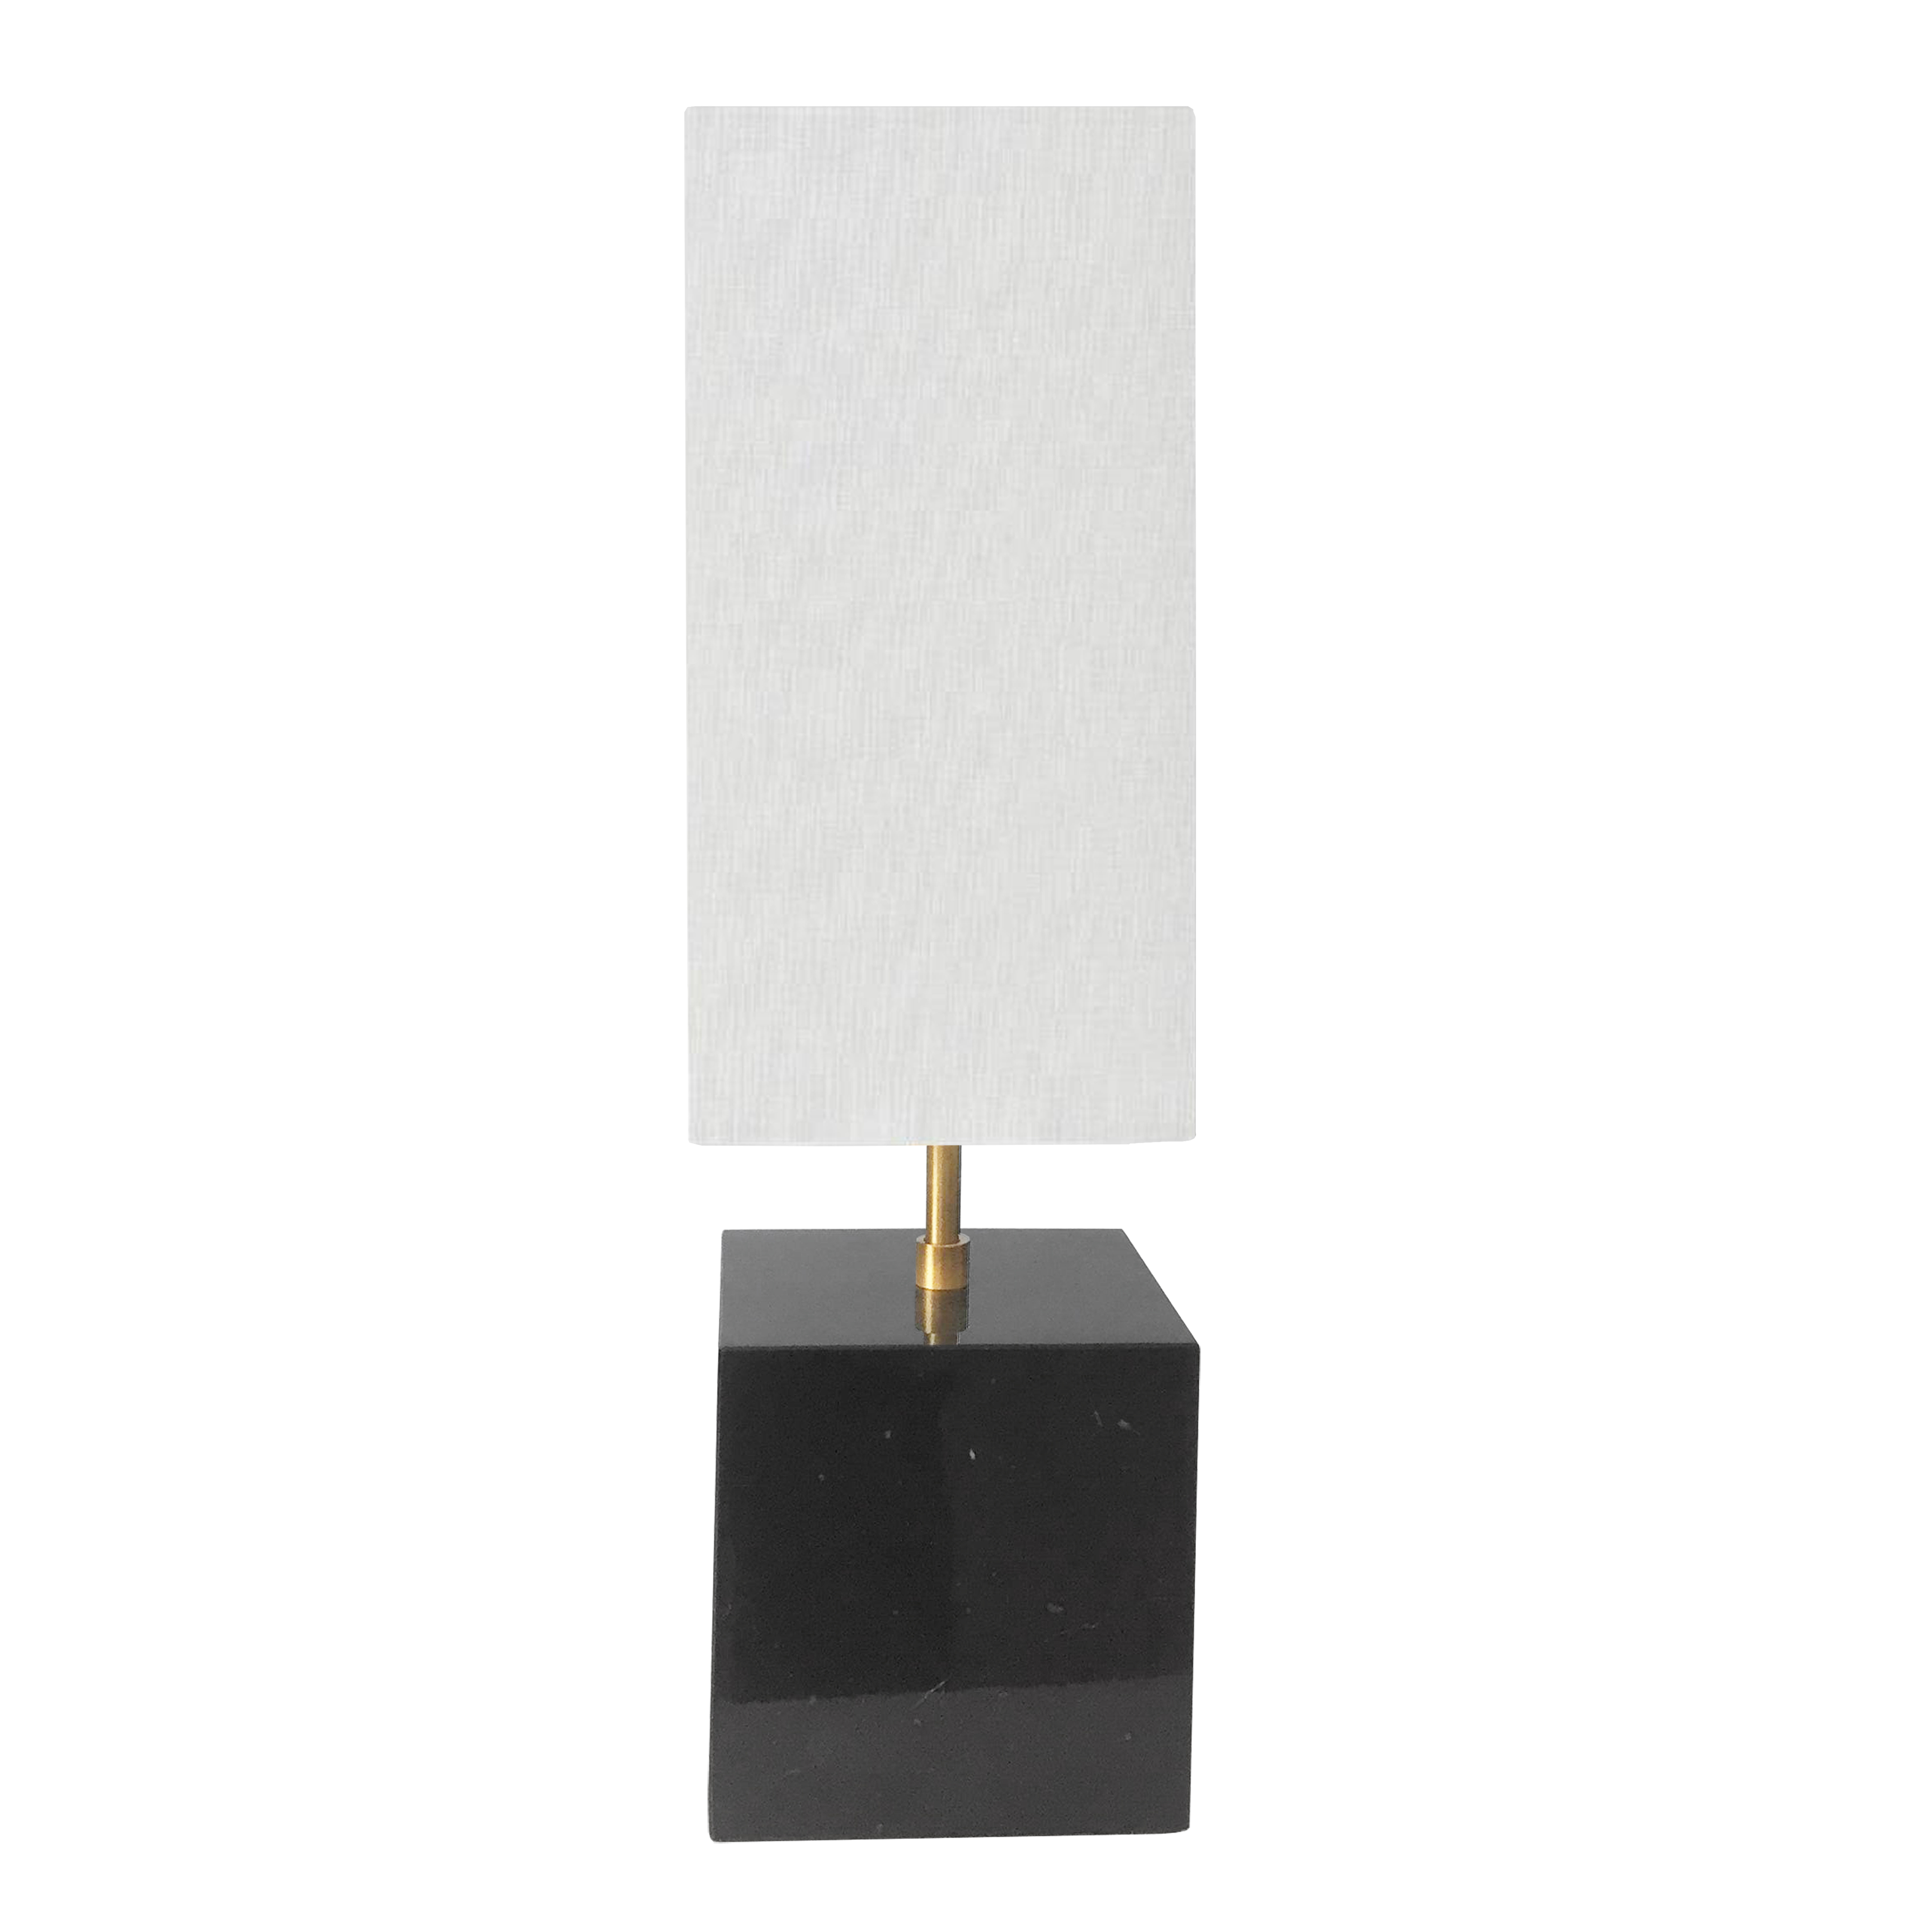 1LT Incandescent table lamp BK/AGB, White Shade